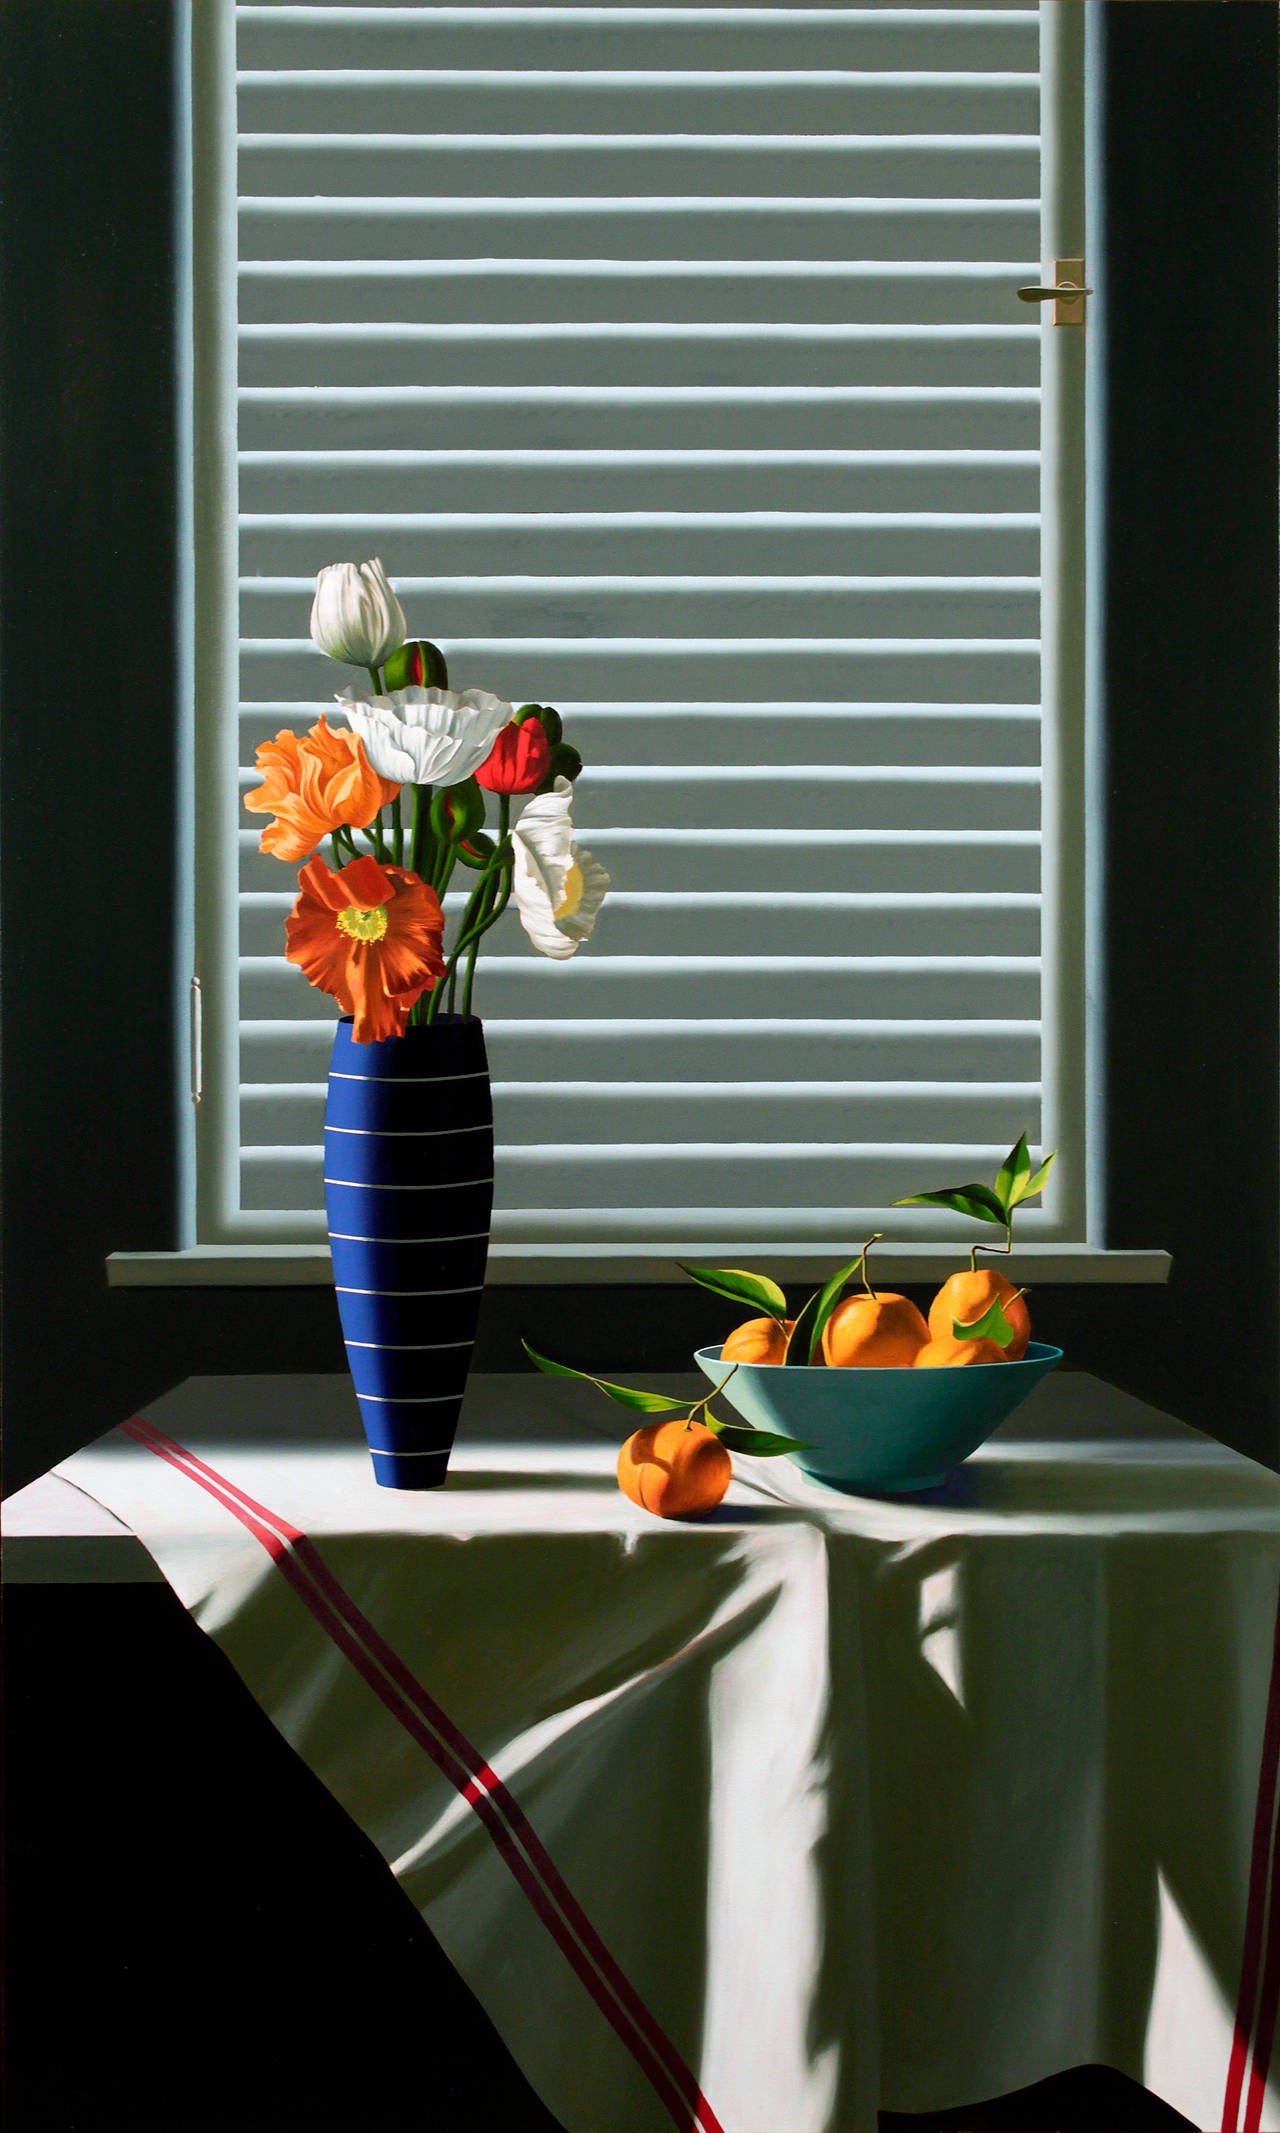 Poppies and Oranges - Painting by Bruce Cohen